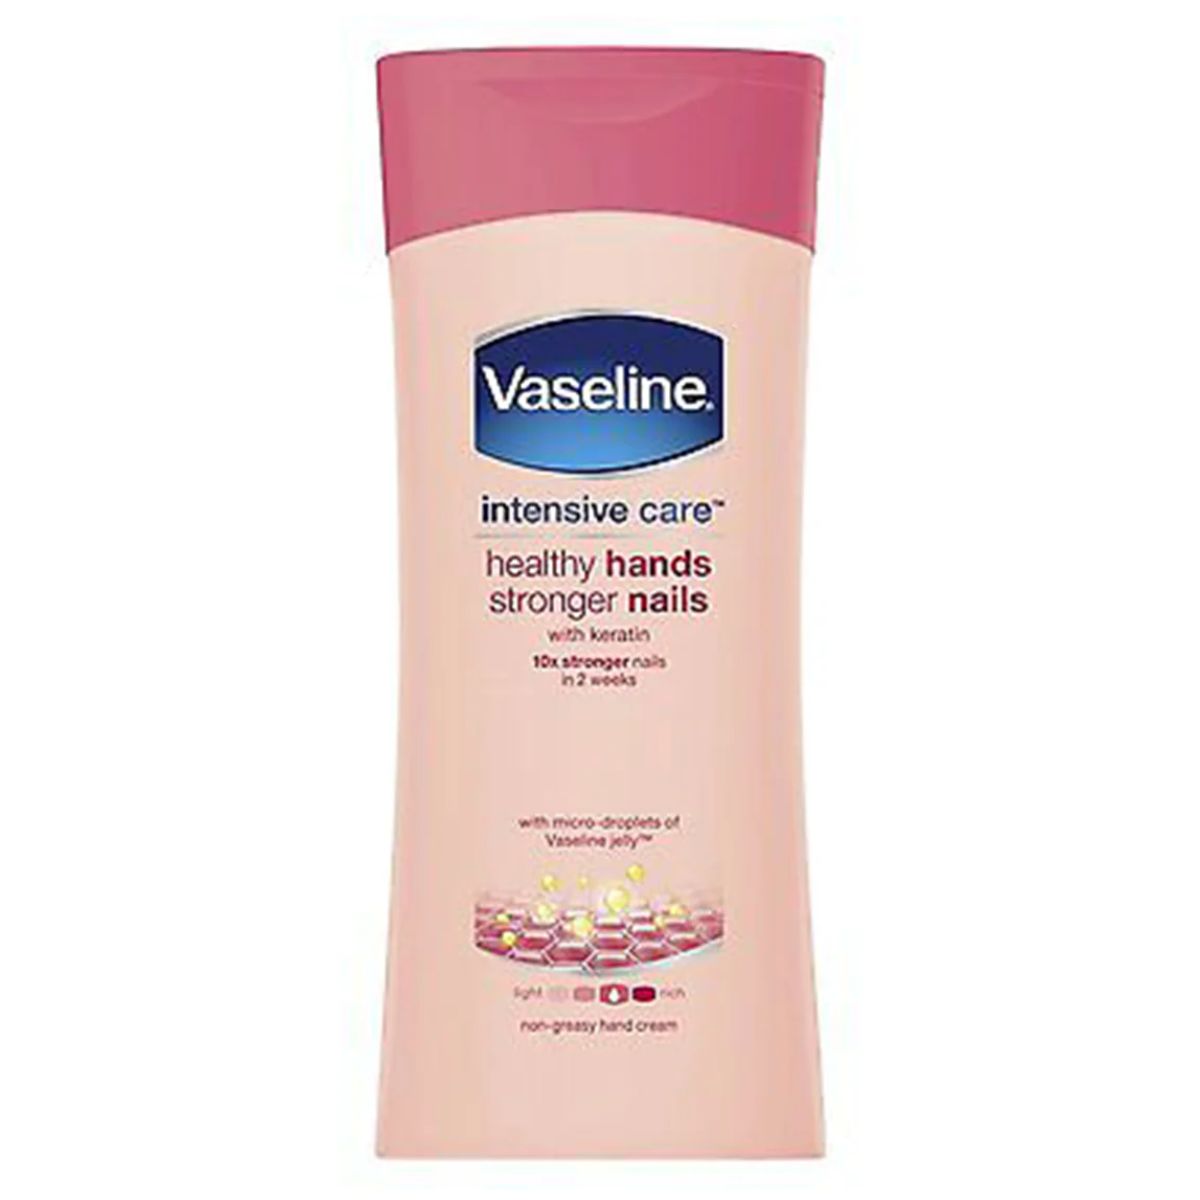 A bottle of Vaseline - Intensive Care Hand Plus Nail Cream - 200ml for healthy, stronger nails.